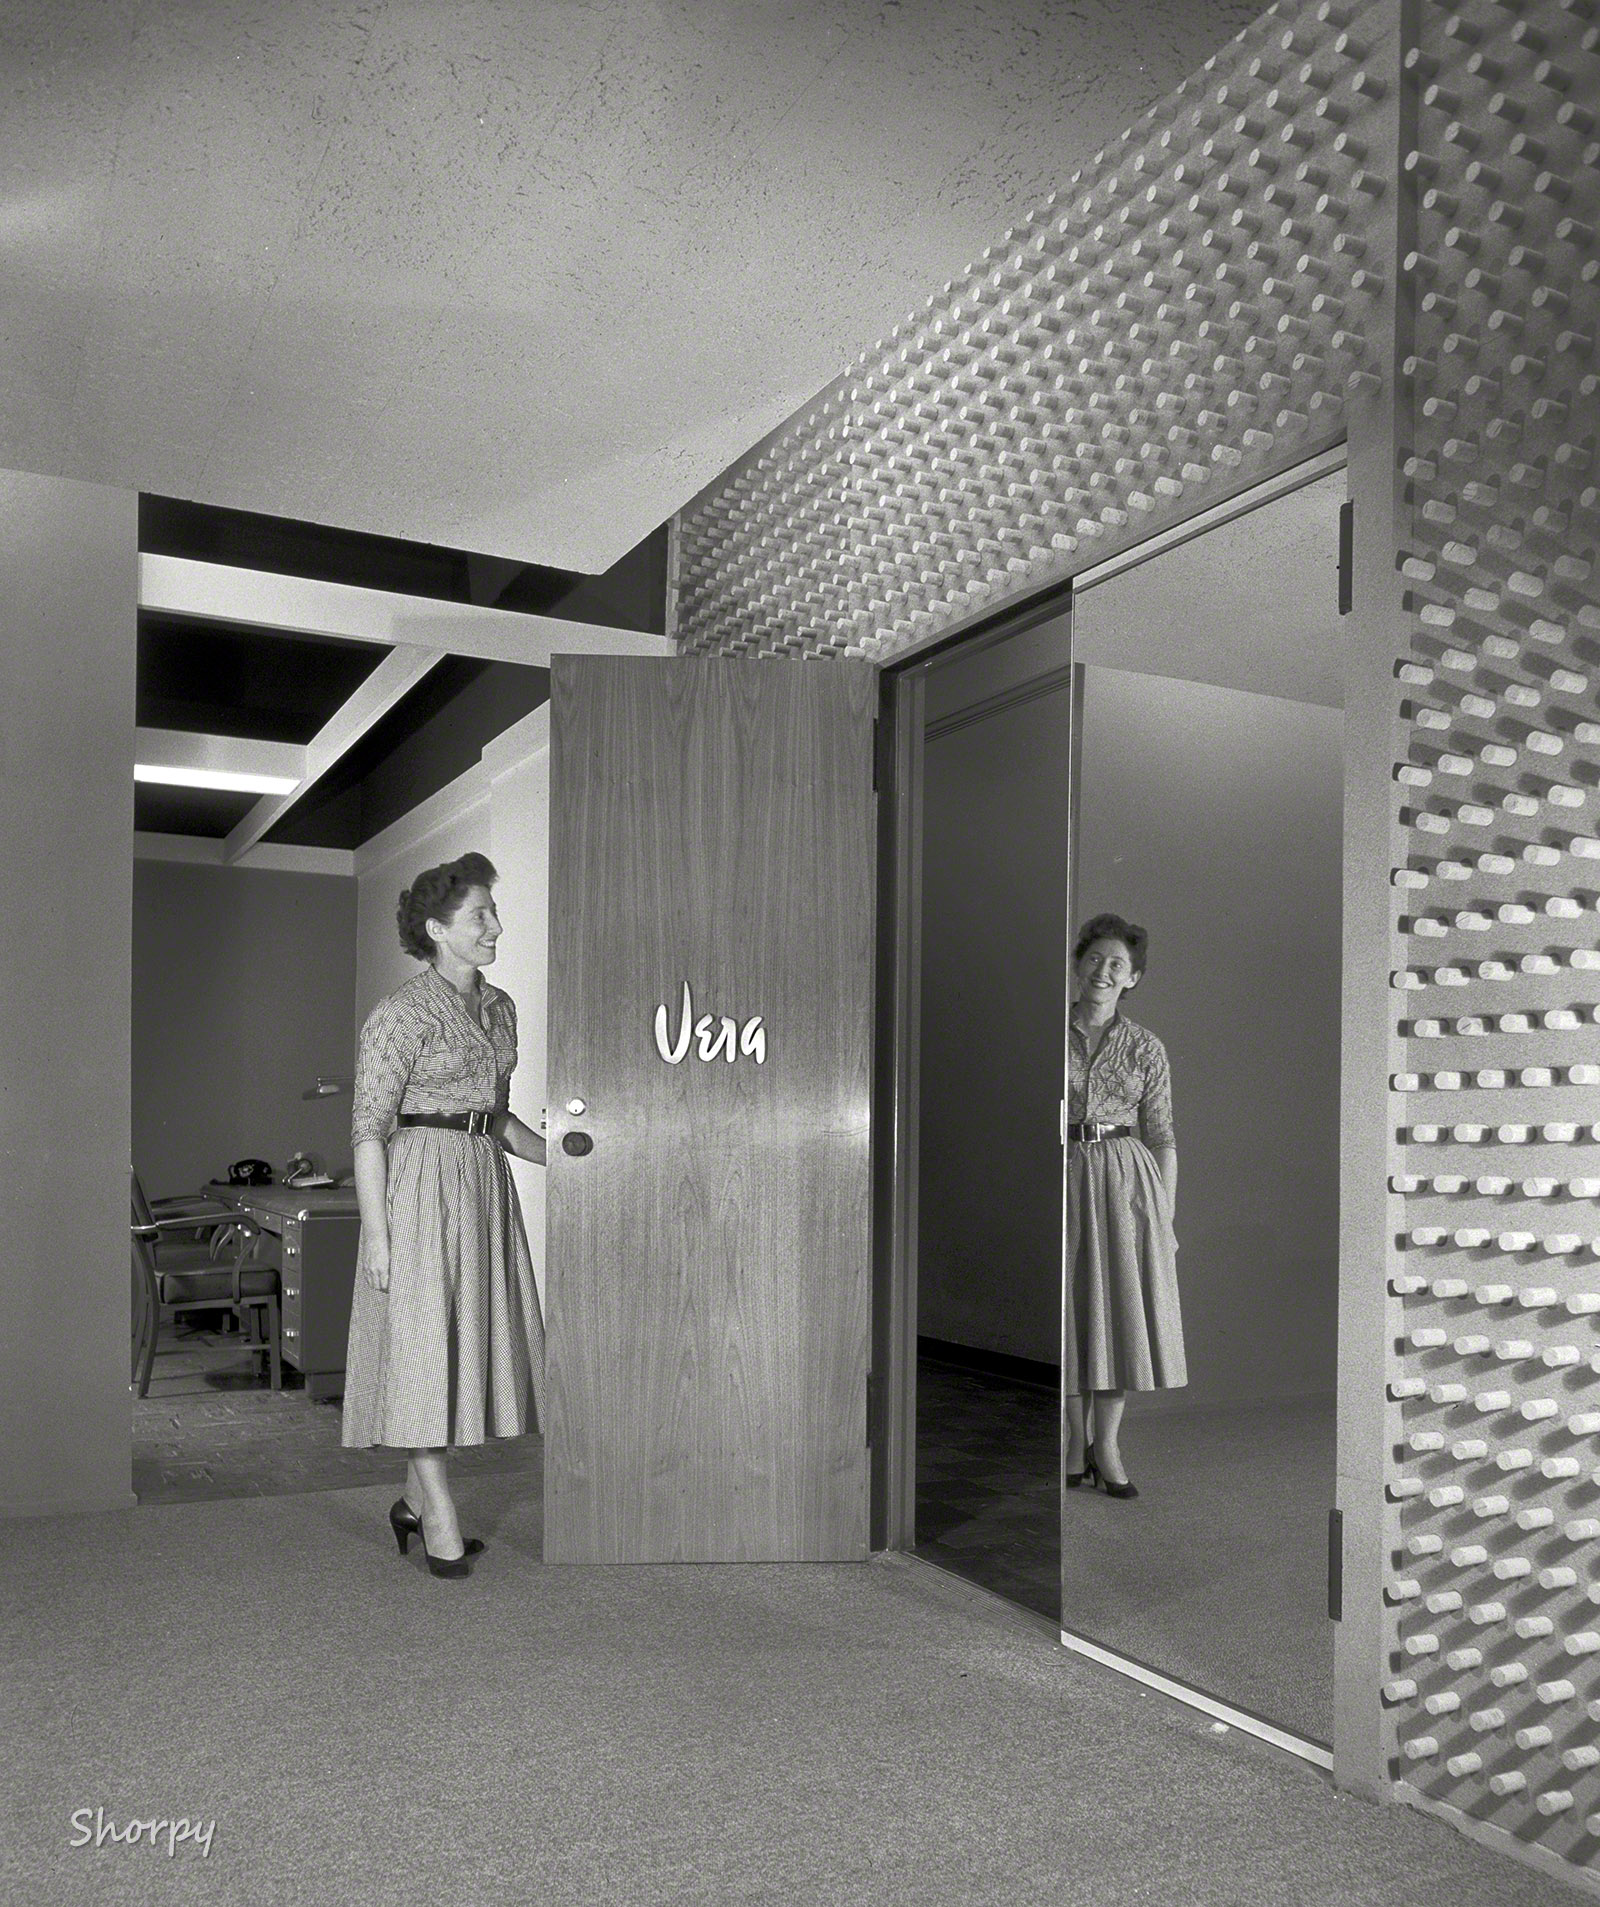 June 20, 1952. "Scarves by Vera, 417 Fifth Avenue, New York. Vera at door. Marcel Breuer, architect." If you hope to see some actual scarves here, you are hopelessly unsophisticated. Gottscho-Schleisner photo. View full size.